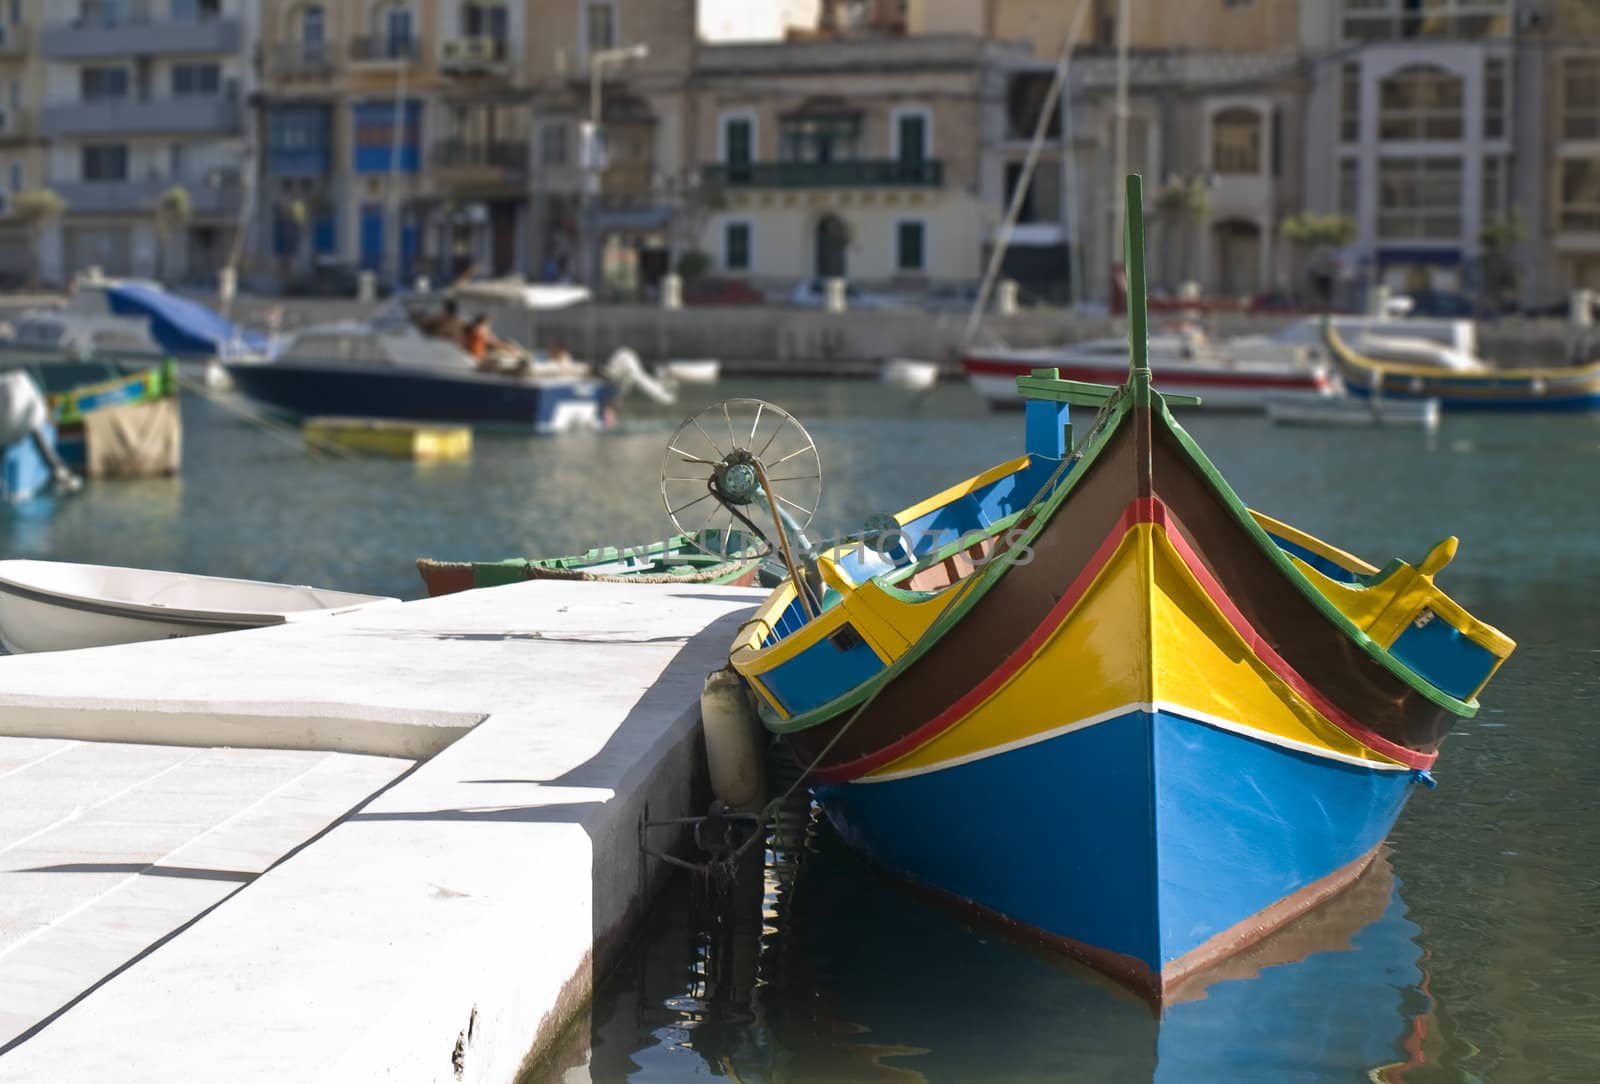 Balluta Bay in St Julians in Malta is a tourist hotspot as contains a mixture of medieval and modern elements